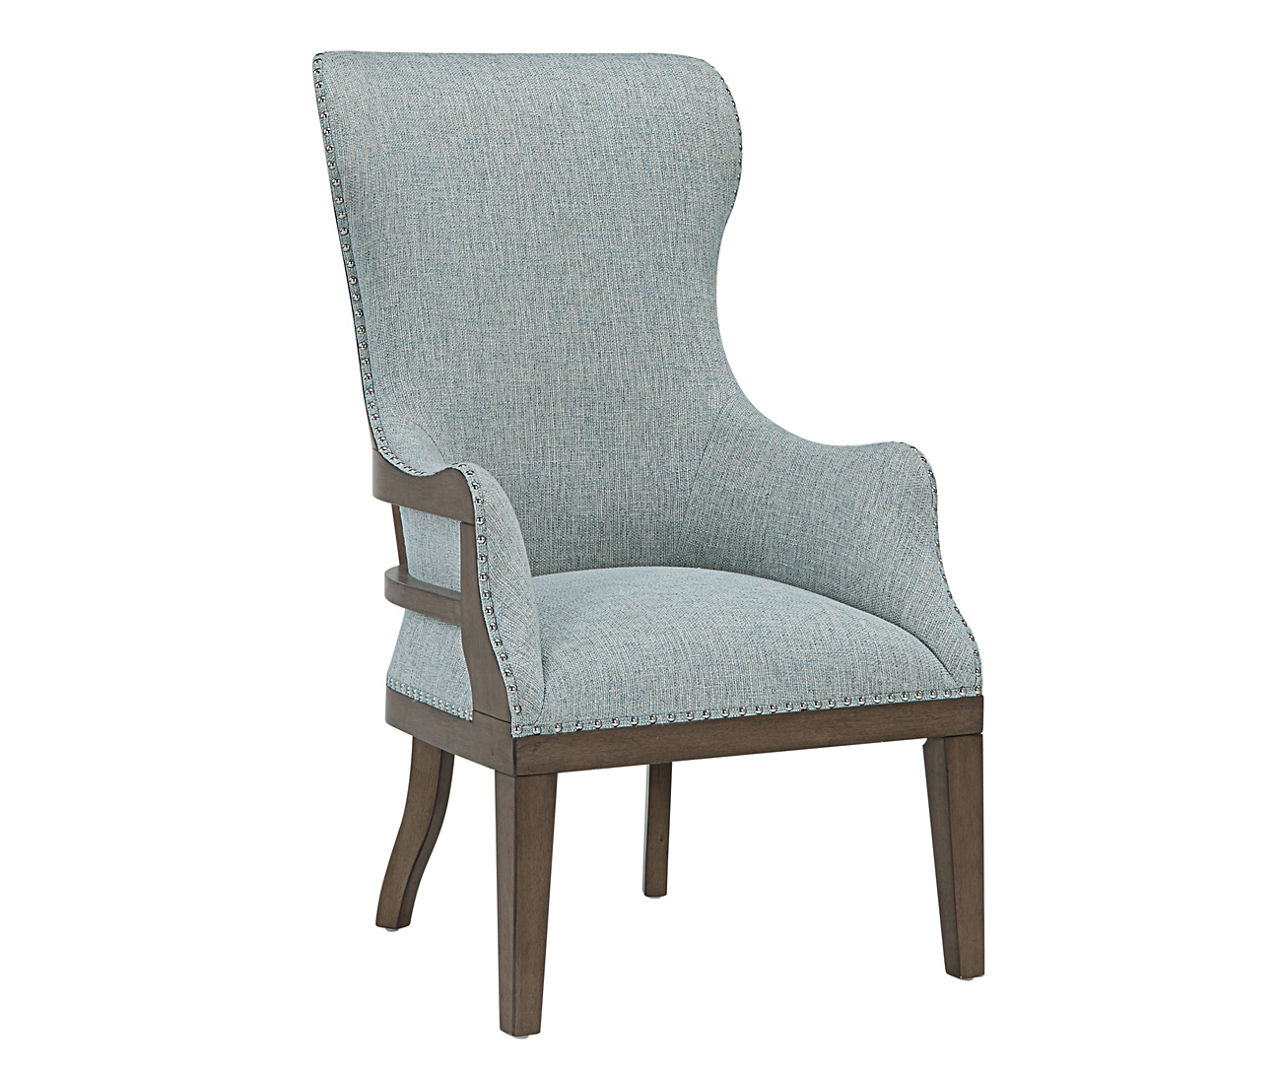 EMERSON SKY ACCENT CHAIR